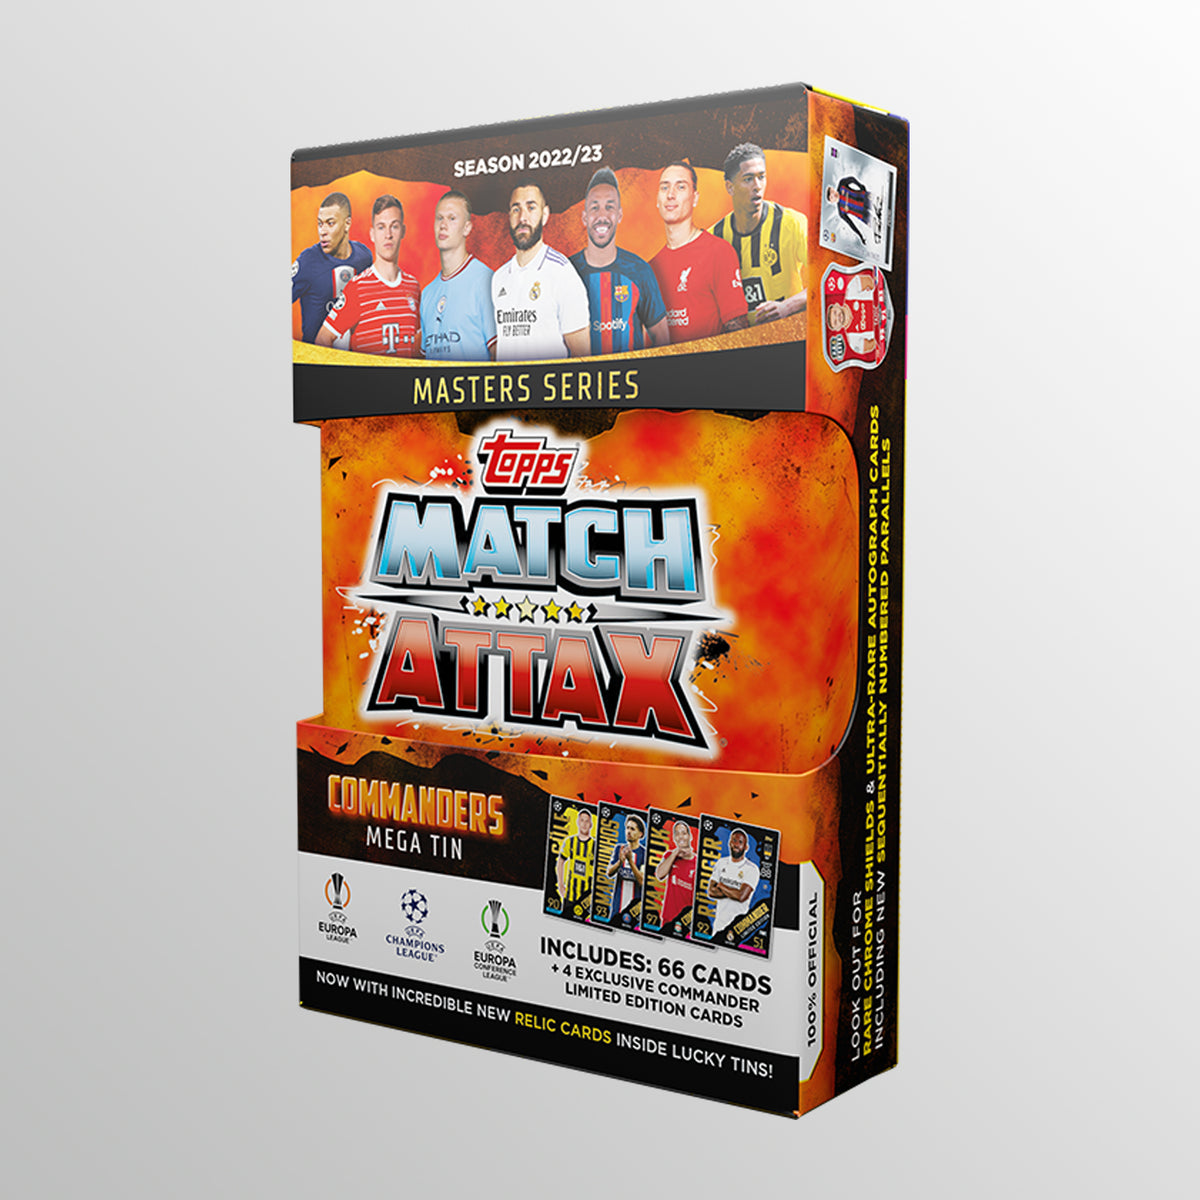 Match Attax 22/23 - Mega Tin - Commanders UEFA Club Competitions Online Store